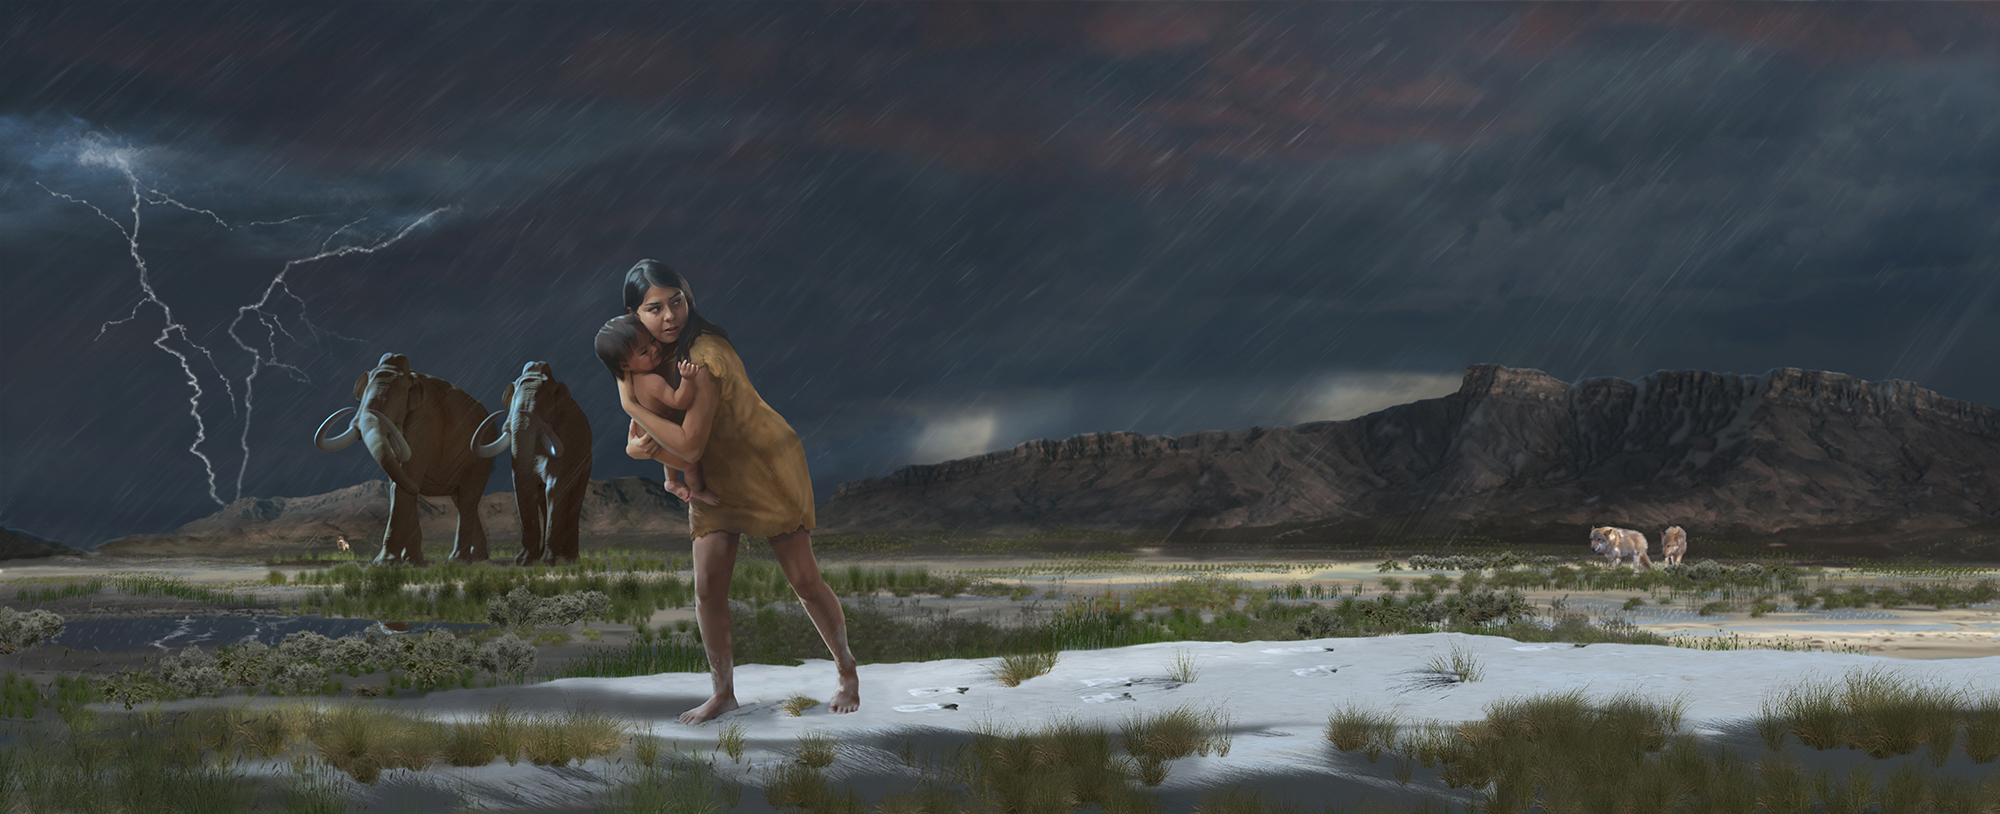 A woman and child walk through mud on a stormy night followed by wolves and mammoths